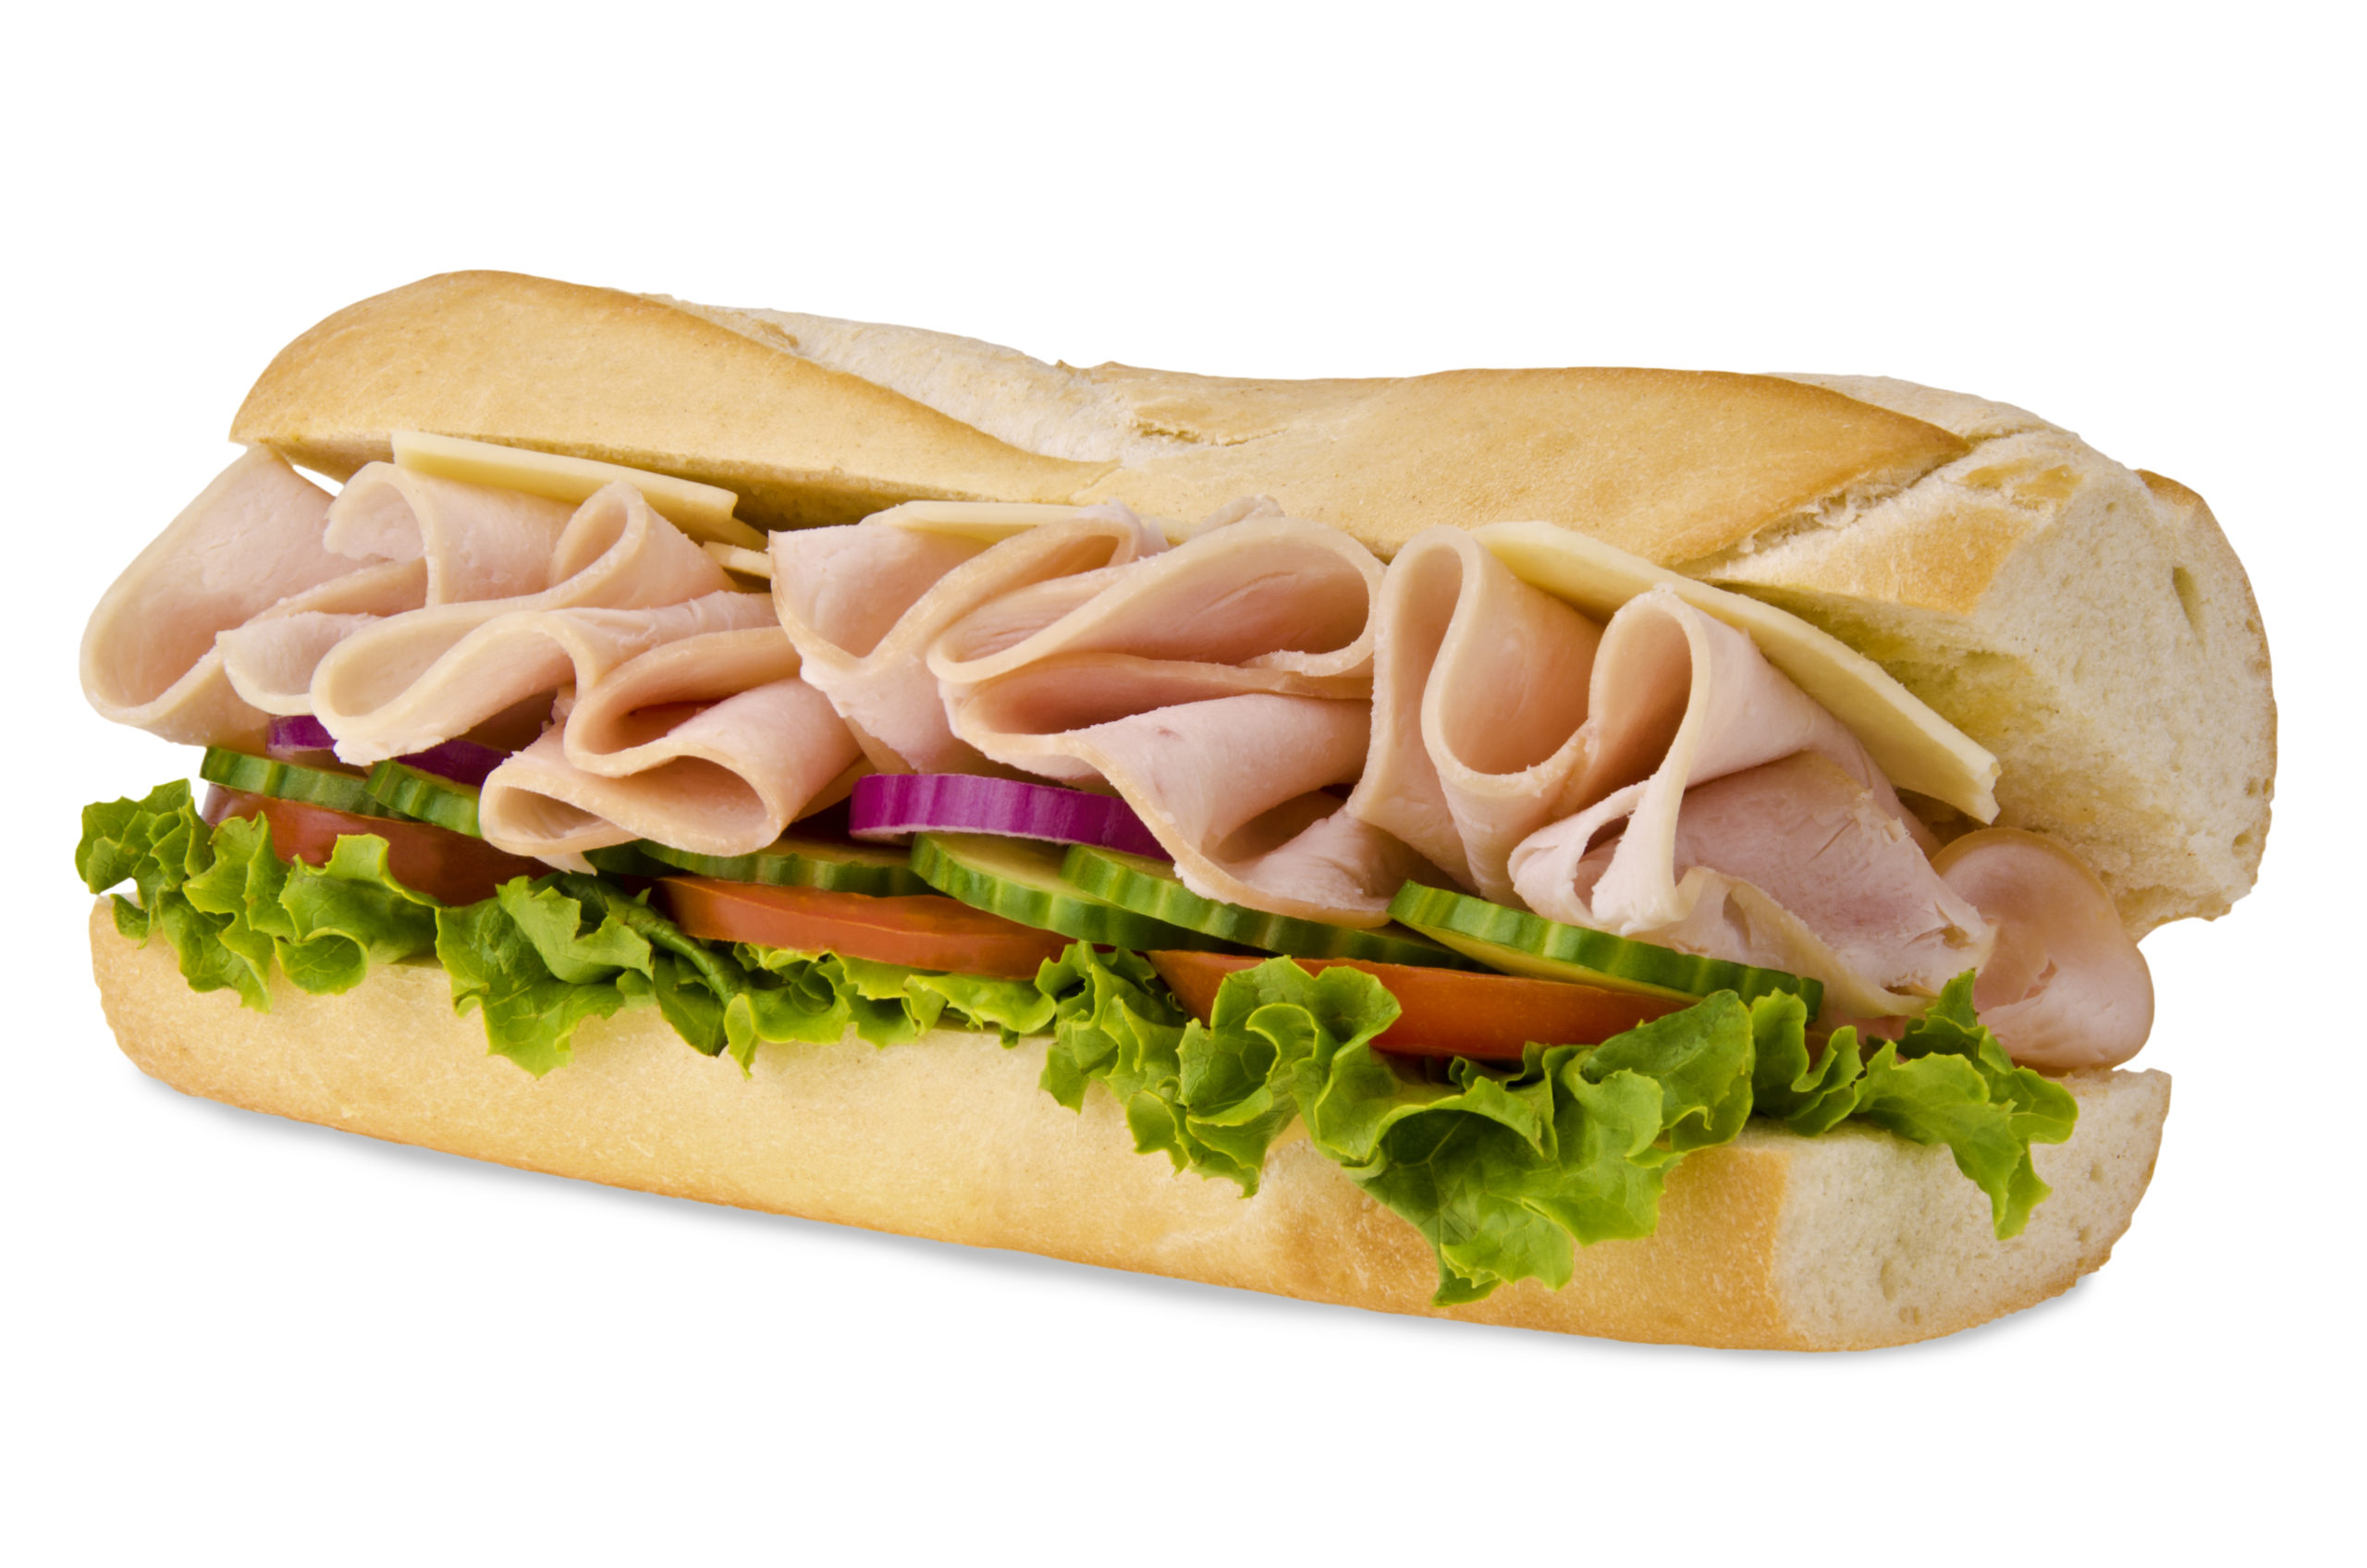 A sub sandwich overflowing with ham